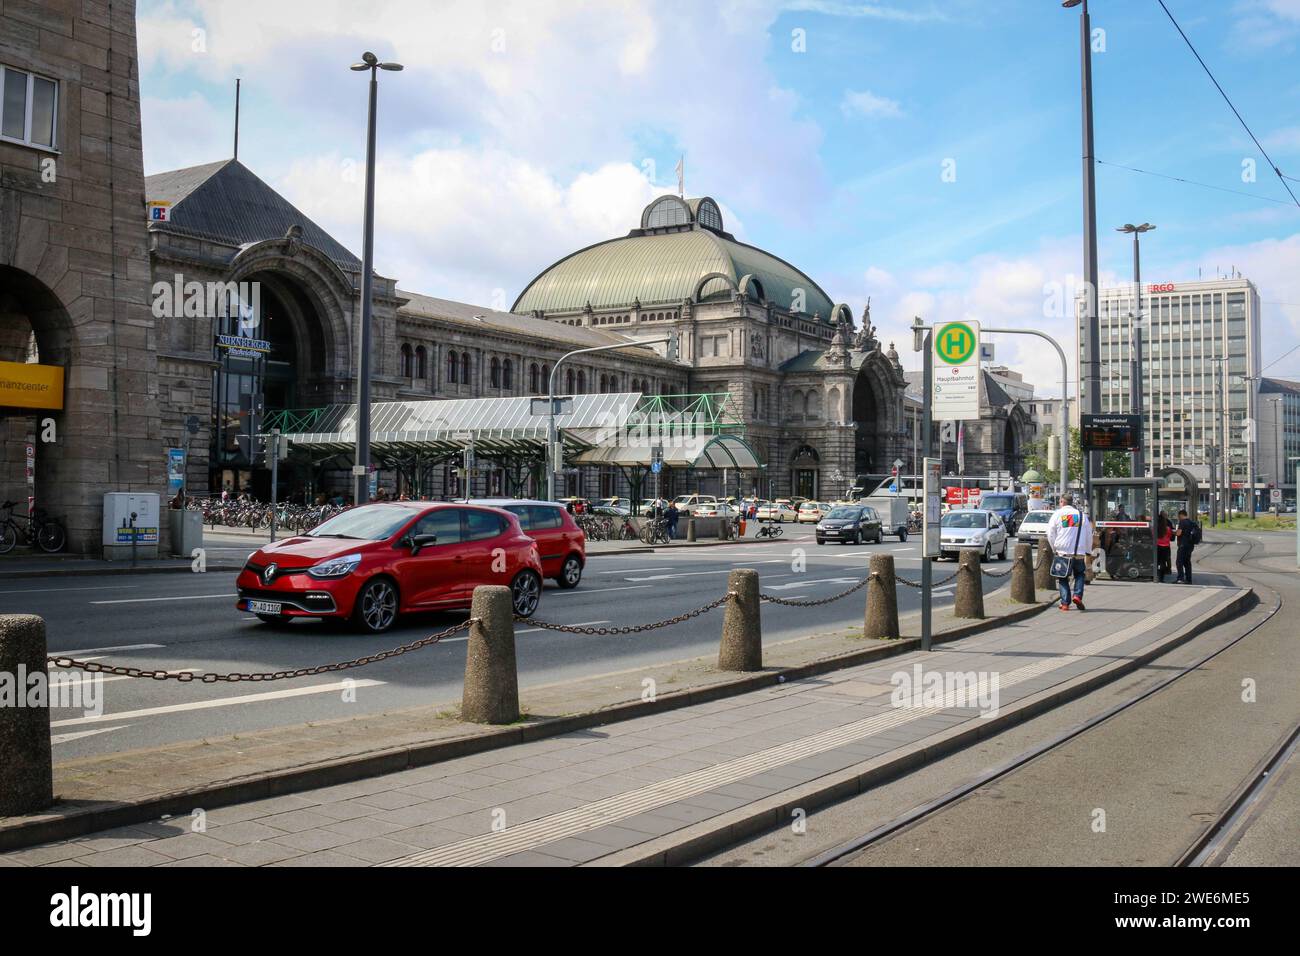 Train station at the city of Nuremberg, Germany Stock Photo